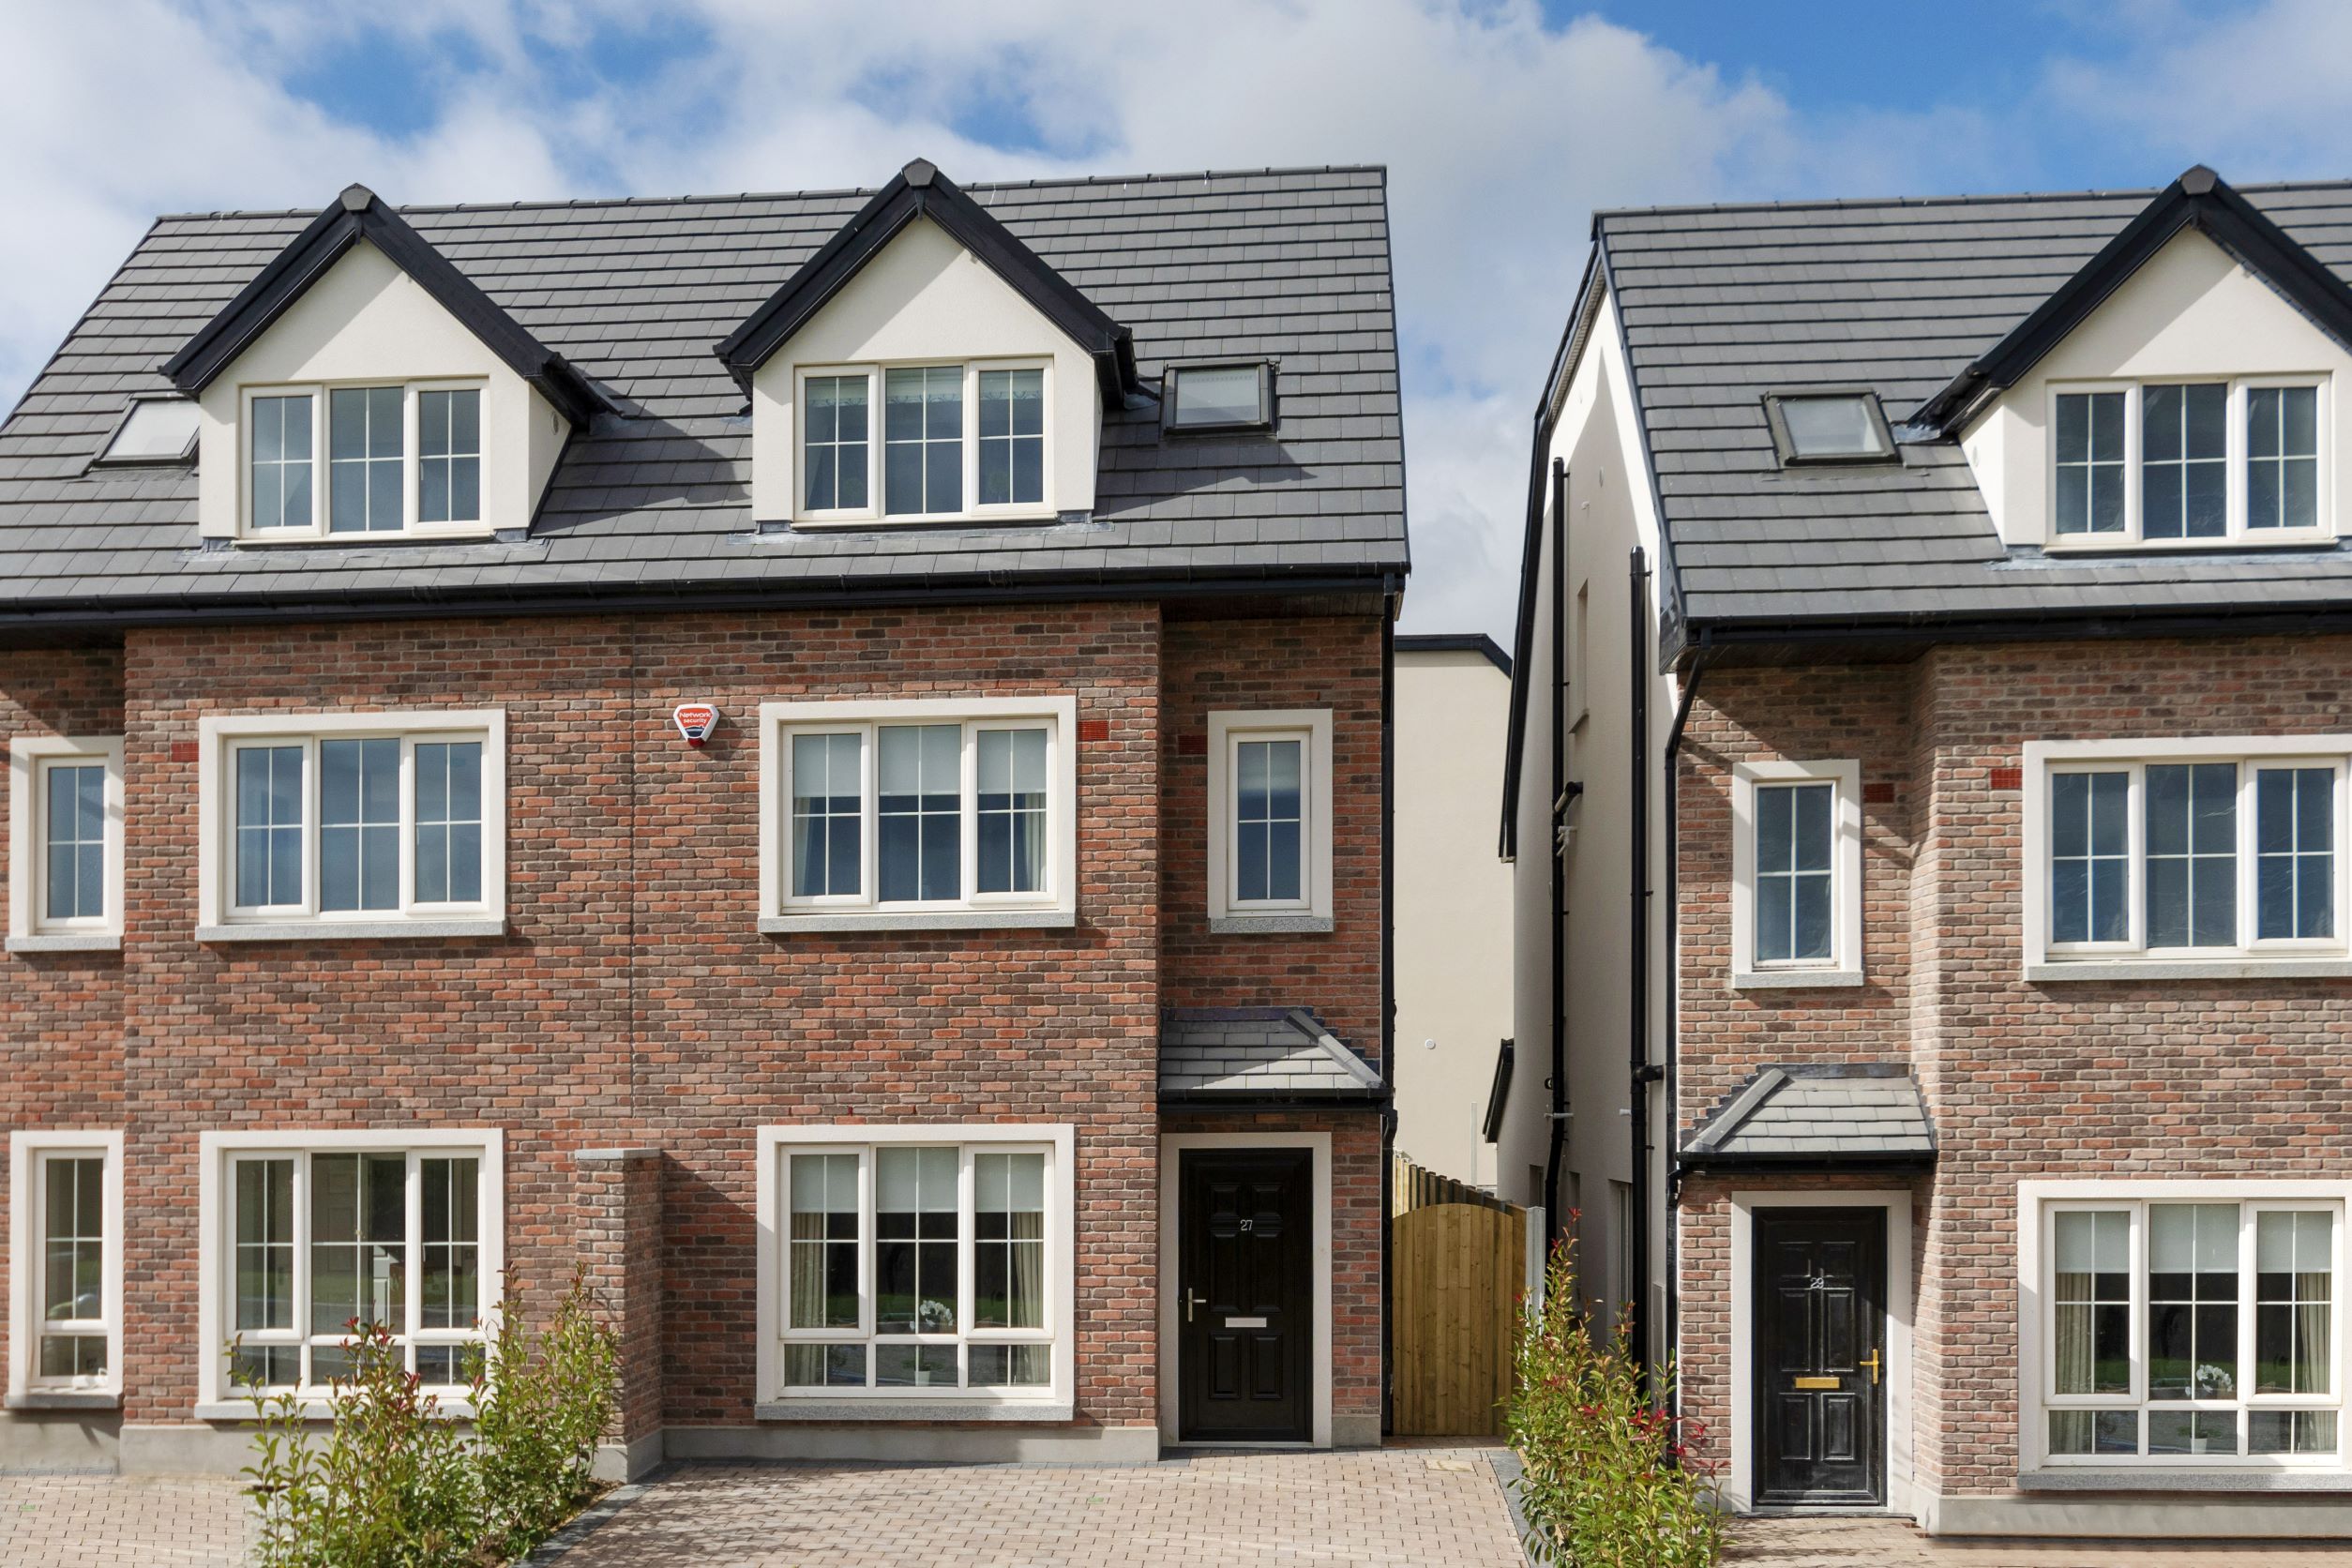 The Grass is Greener with Stanley Residential in Rathcoole